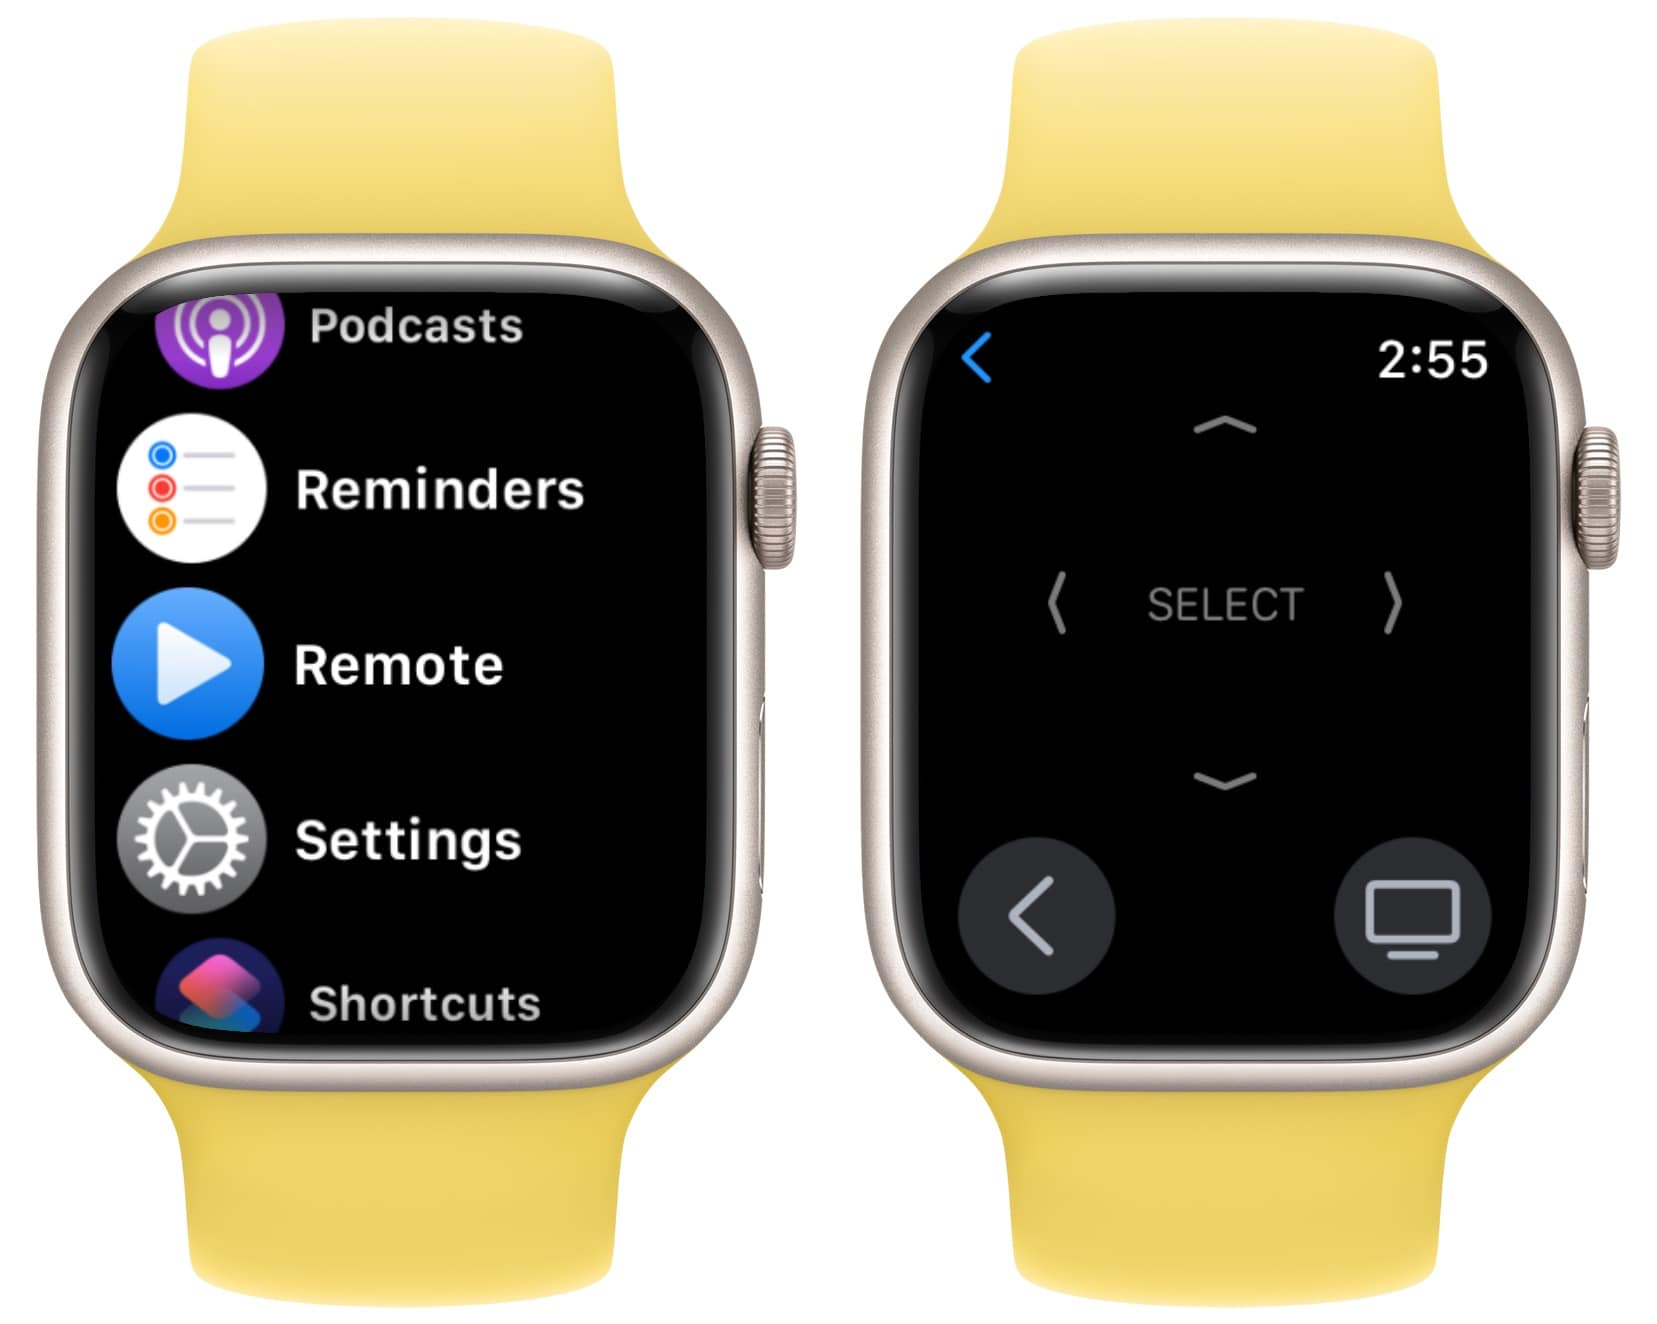 Launching the Remote app on Apple Watch